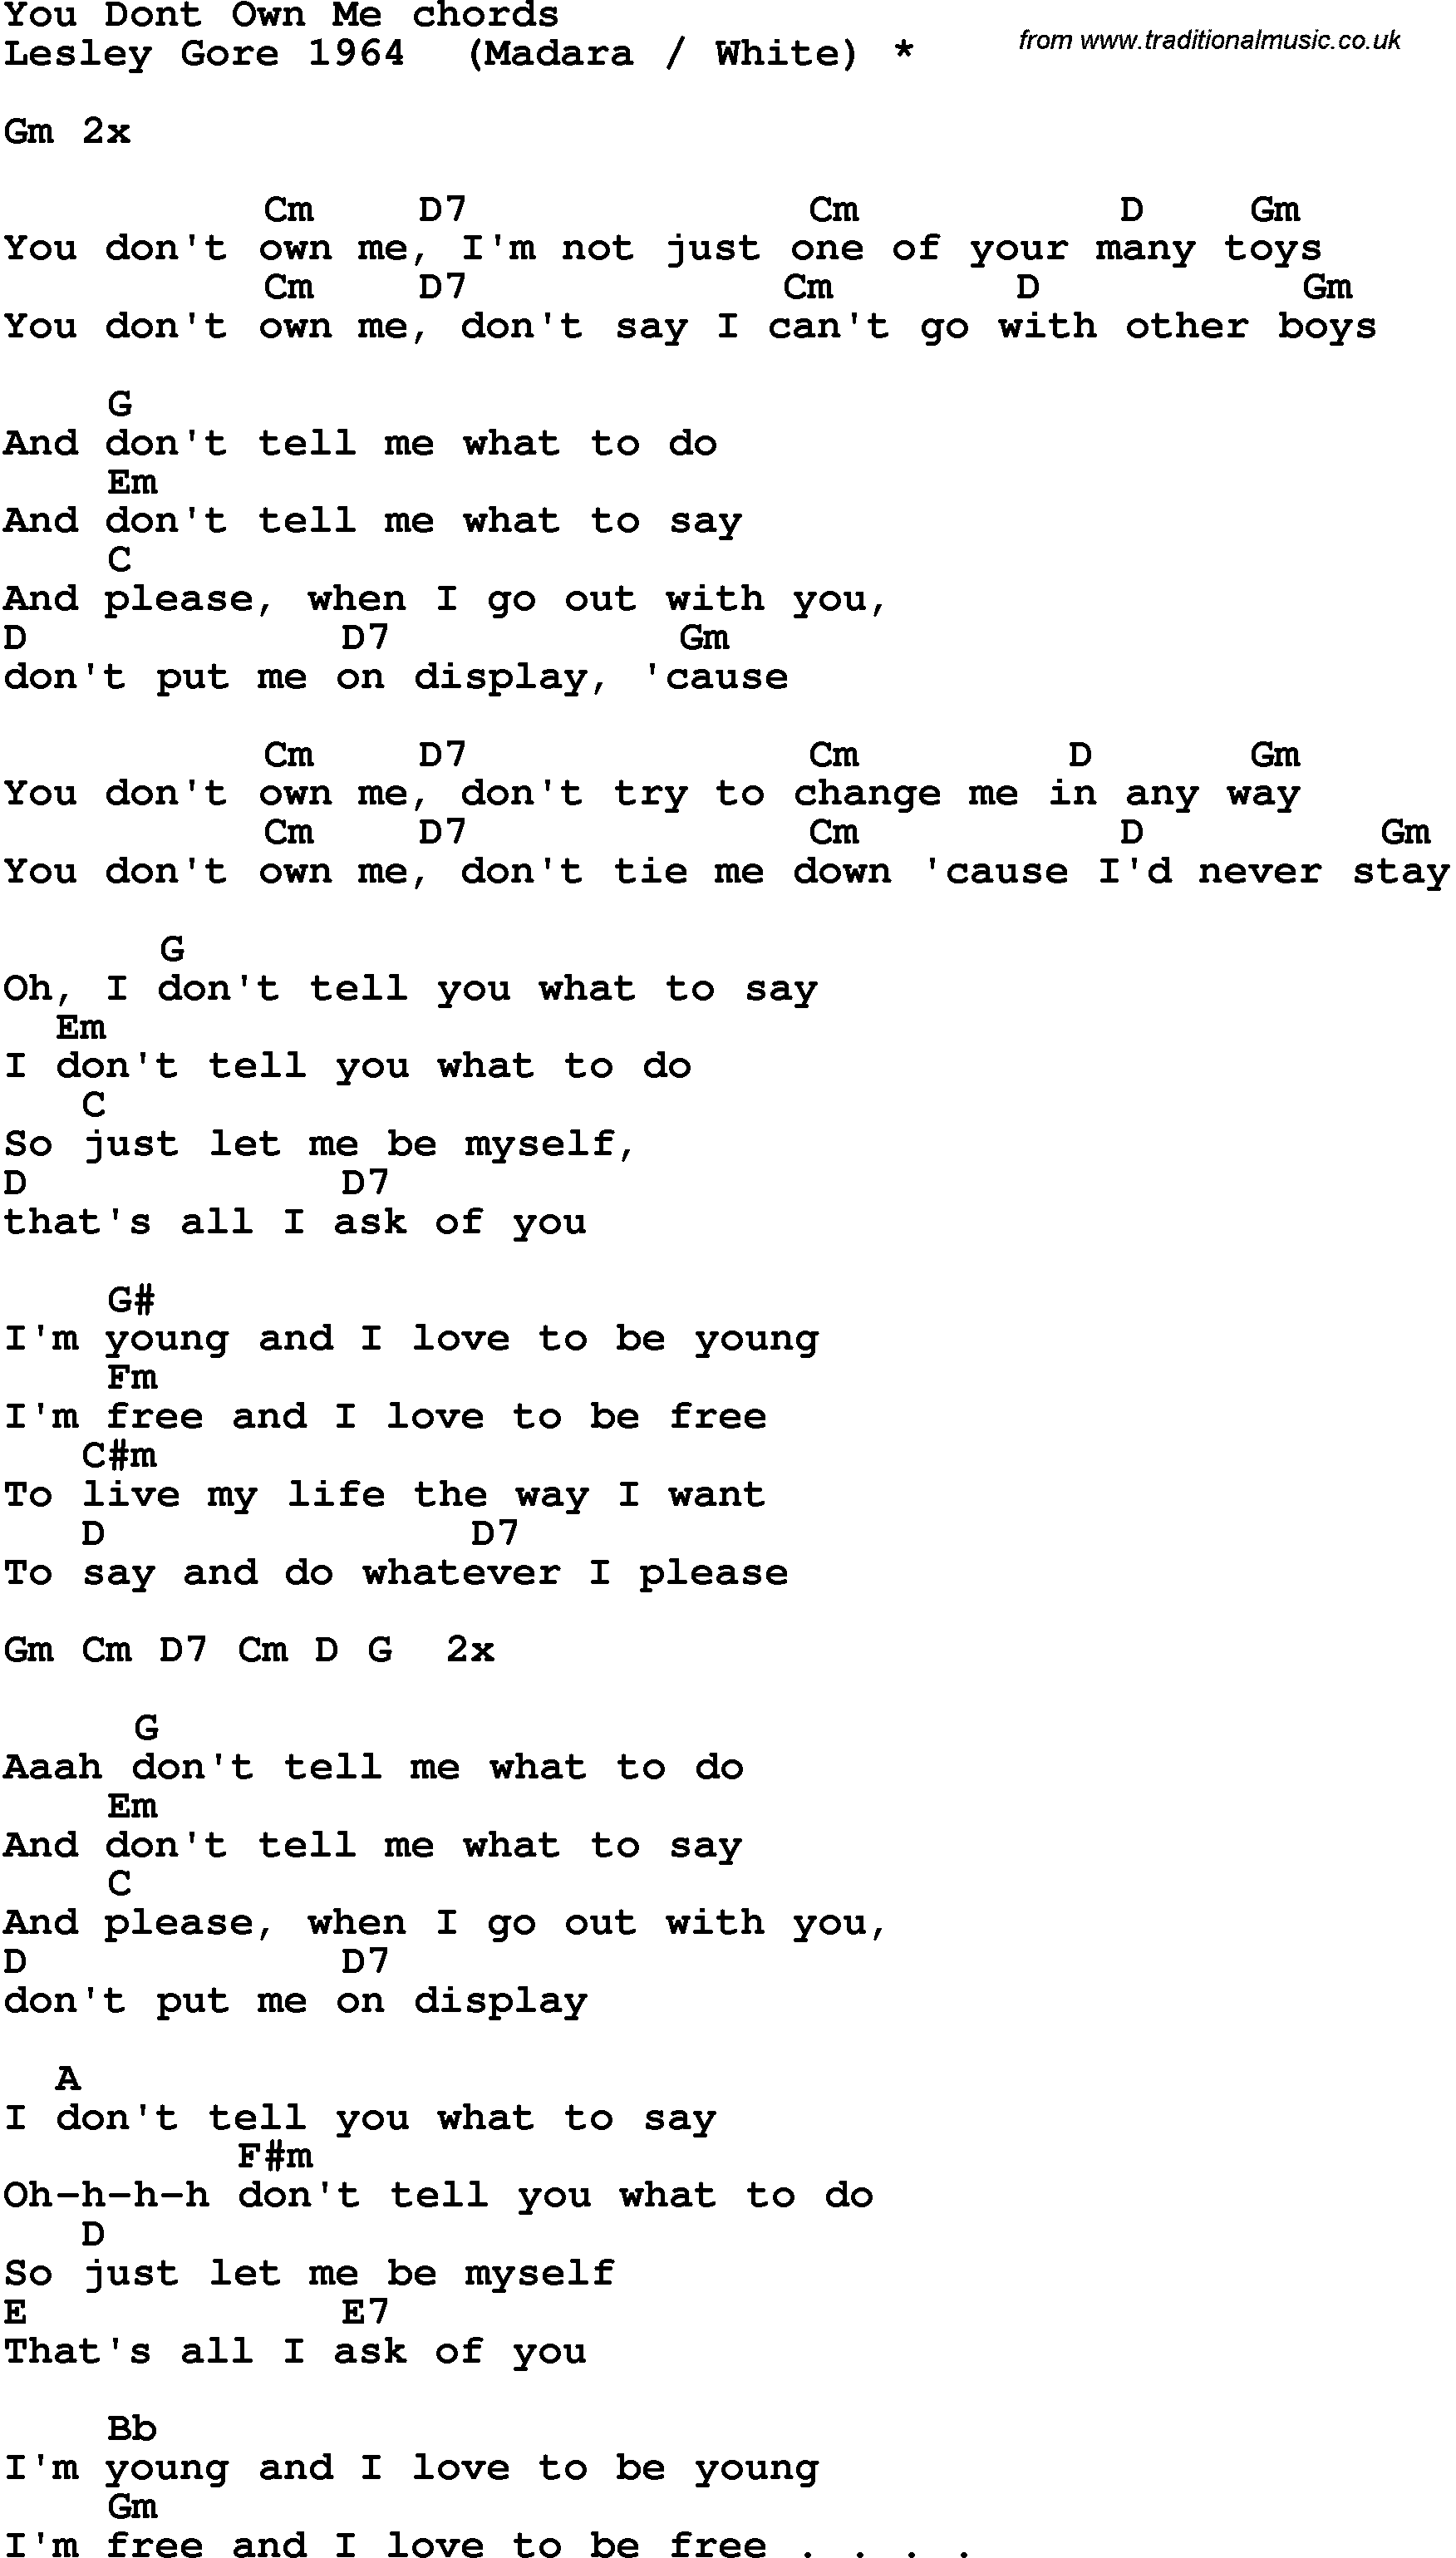 Song Lyrics with guitar chords for You Don't Own Me